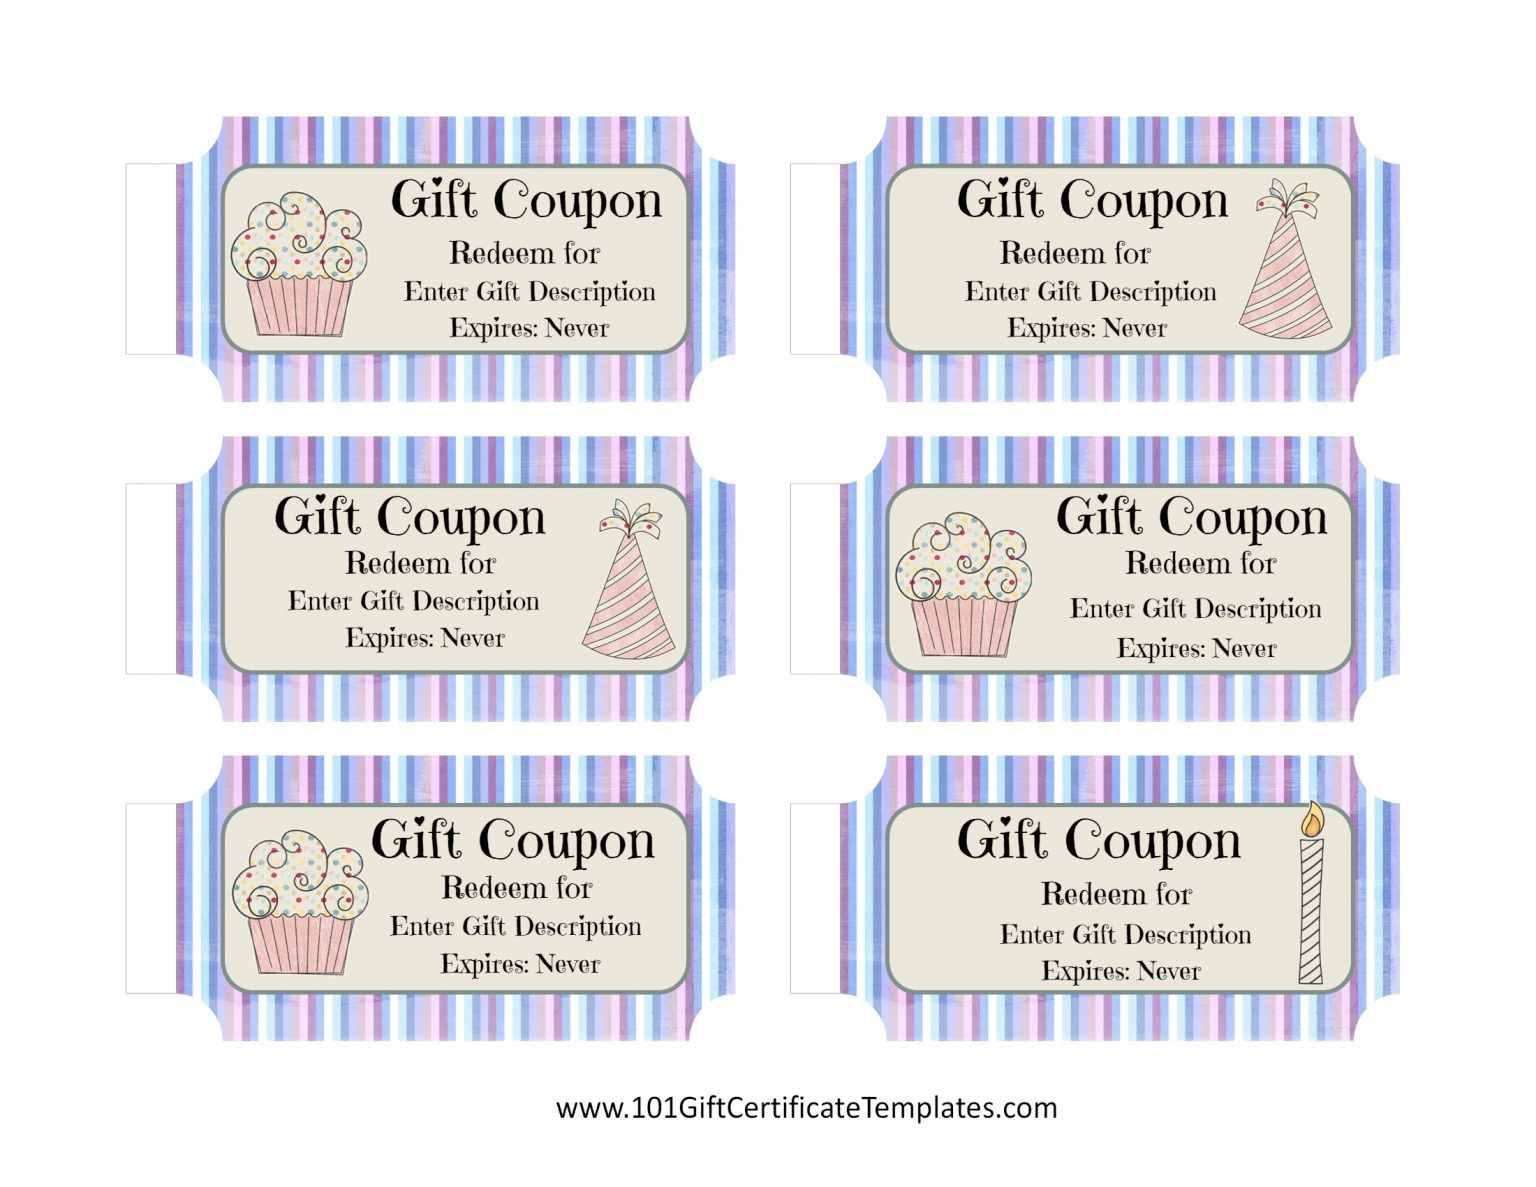 FREE Birthday Coupon Template Customize Online & Print